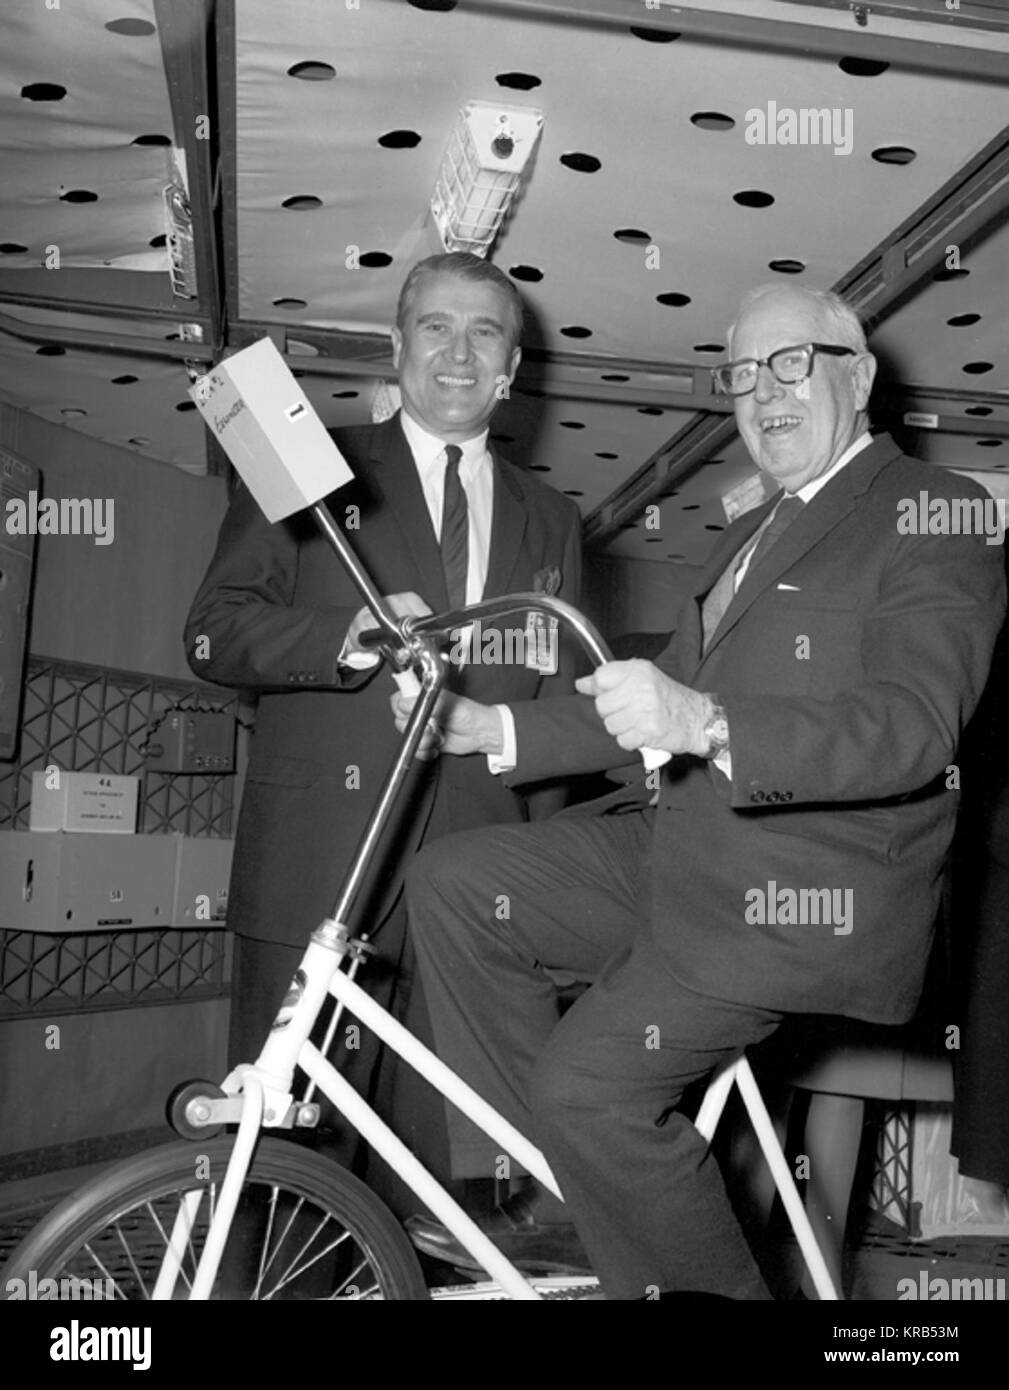 DURING A VISIT TO THE MARSHALL SPACE FLIGHT CENTER (MSFC), THE CONGRESSIONAL HOUSE COMMITTEE ON SCIENCE AND ASTRONAUTICS TOURED THE S-IVB WORKSHOP.  PICTURED HERE ARE MSFC'S DR WERHNER VON BRAUN (STANDING) AND CONGRESSMAN MILLER, A DEMOCRATIC REPRESENTATIVE OF CALIFORNIA (SITTING ON THE ERGOMETER BICYCLE) INSIDE THE WORKSHOP. VonBraunMiller Stock Photo